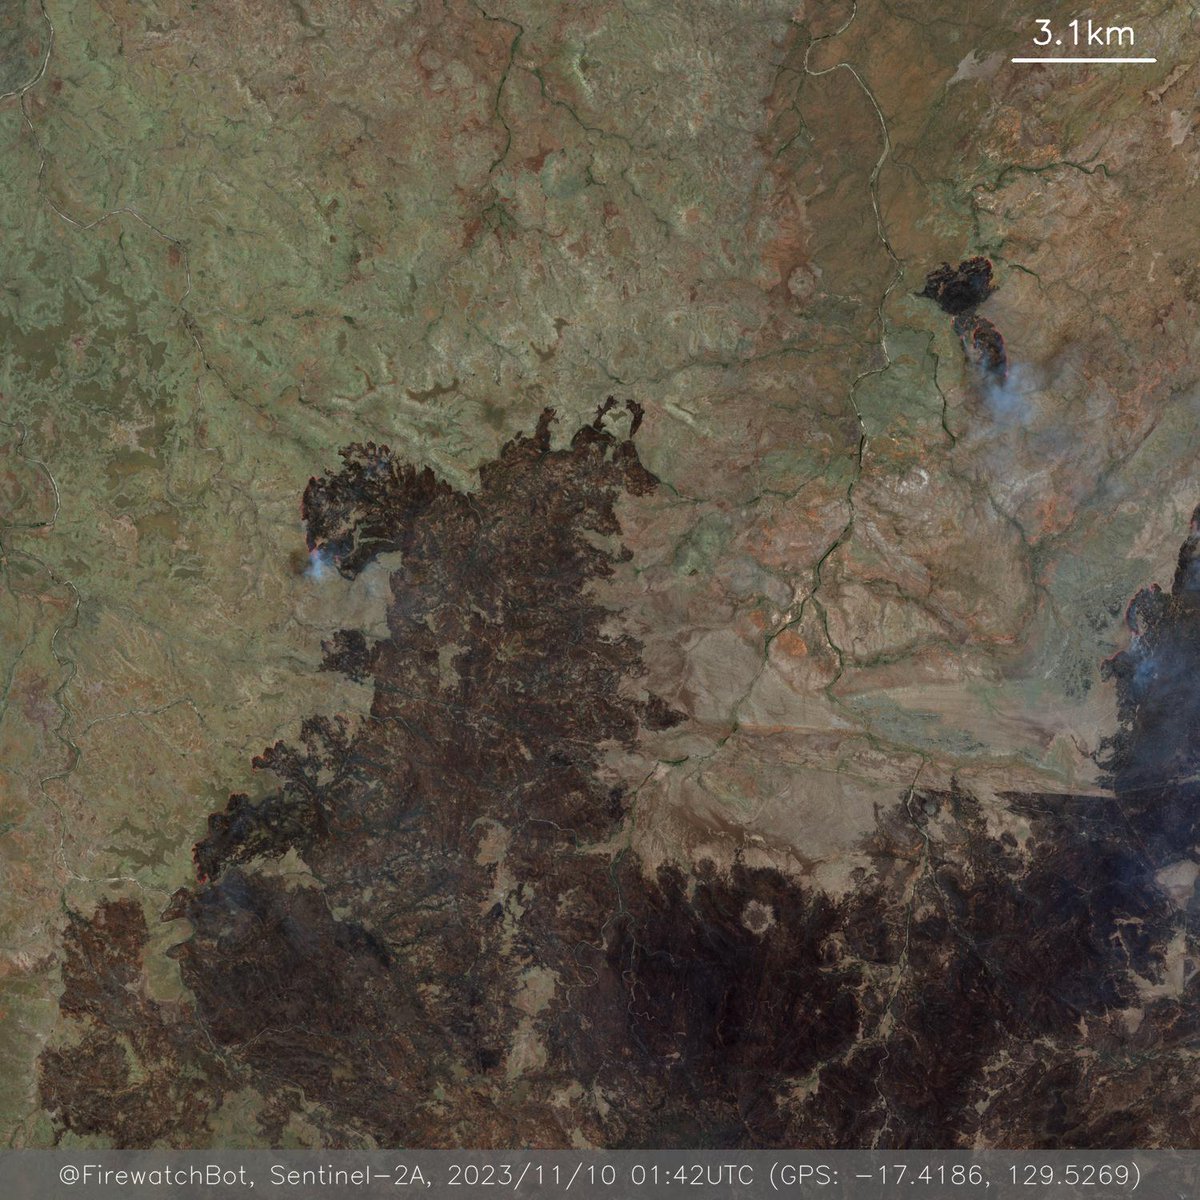 Fire detected from Sentinel2 Place: Victoria Daly Region, Northern Territory, Australia